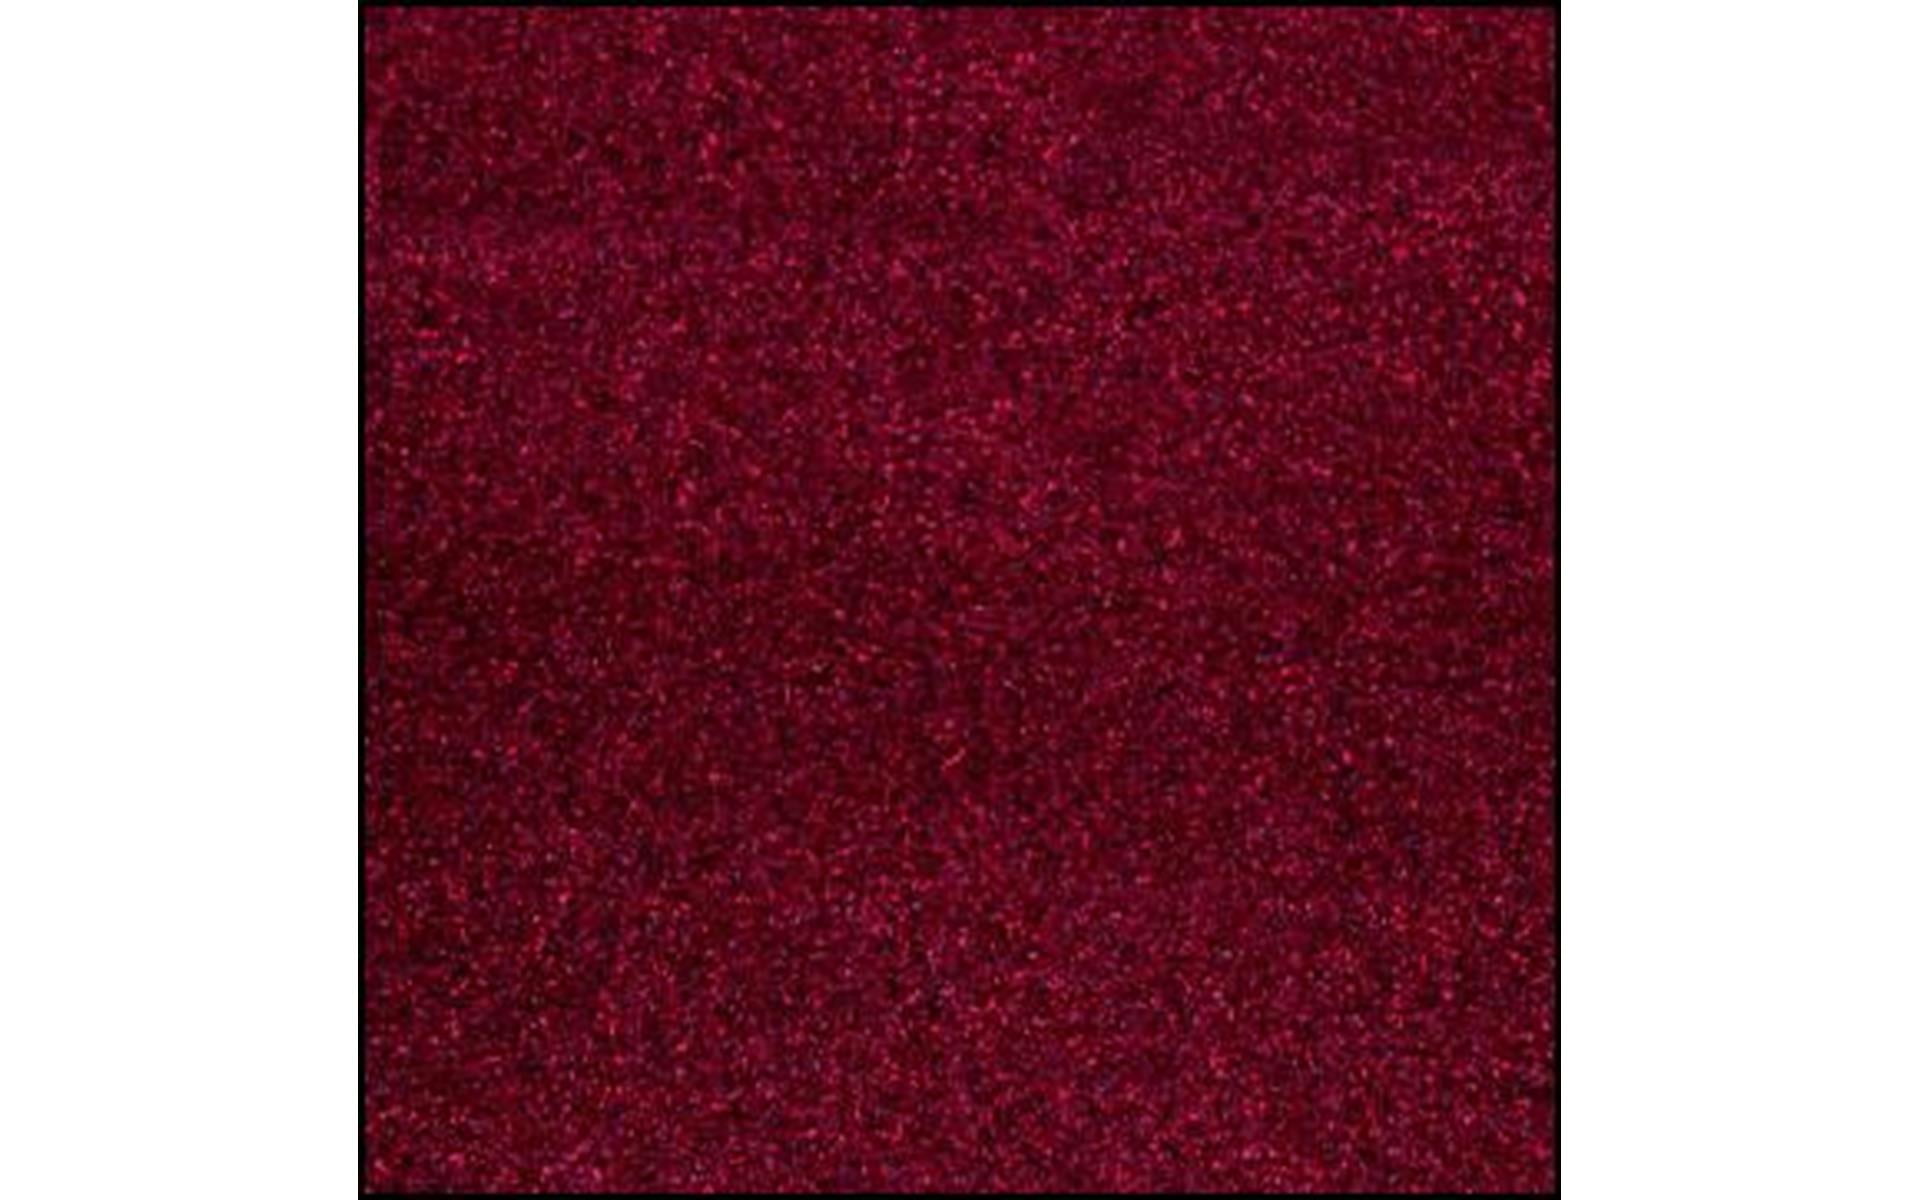 15 Per Pack Best Creation 12-Inch by 12-Inch Glitter Cardstock Wine Red